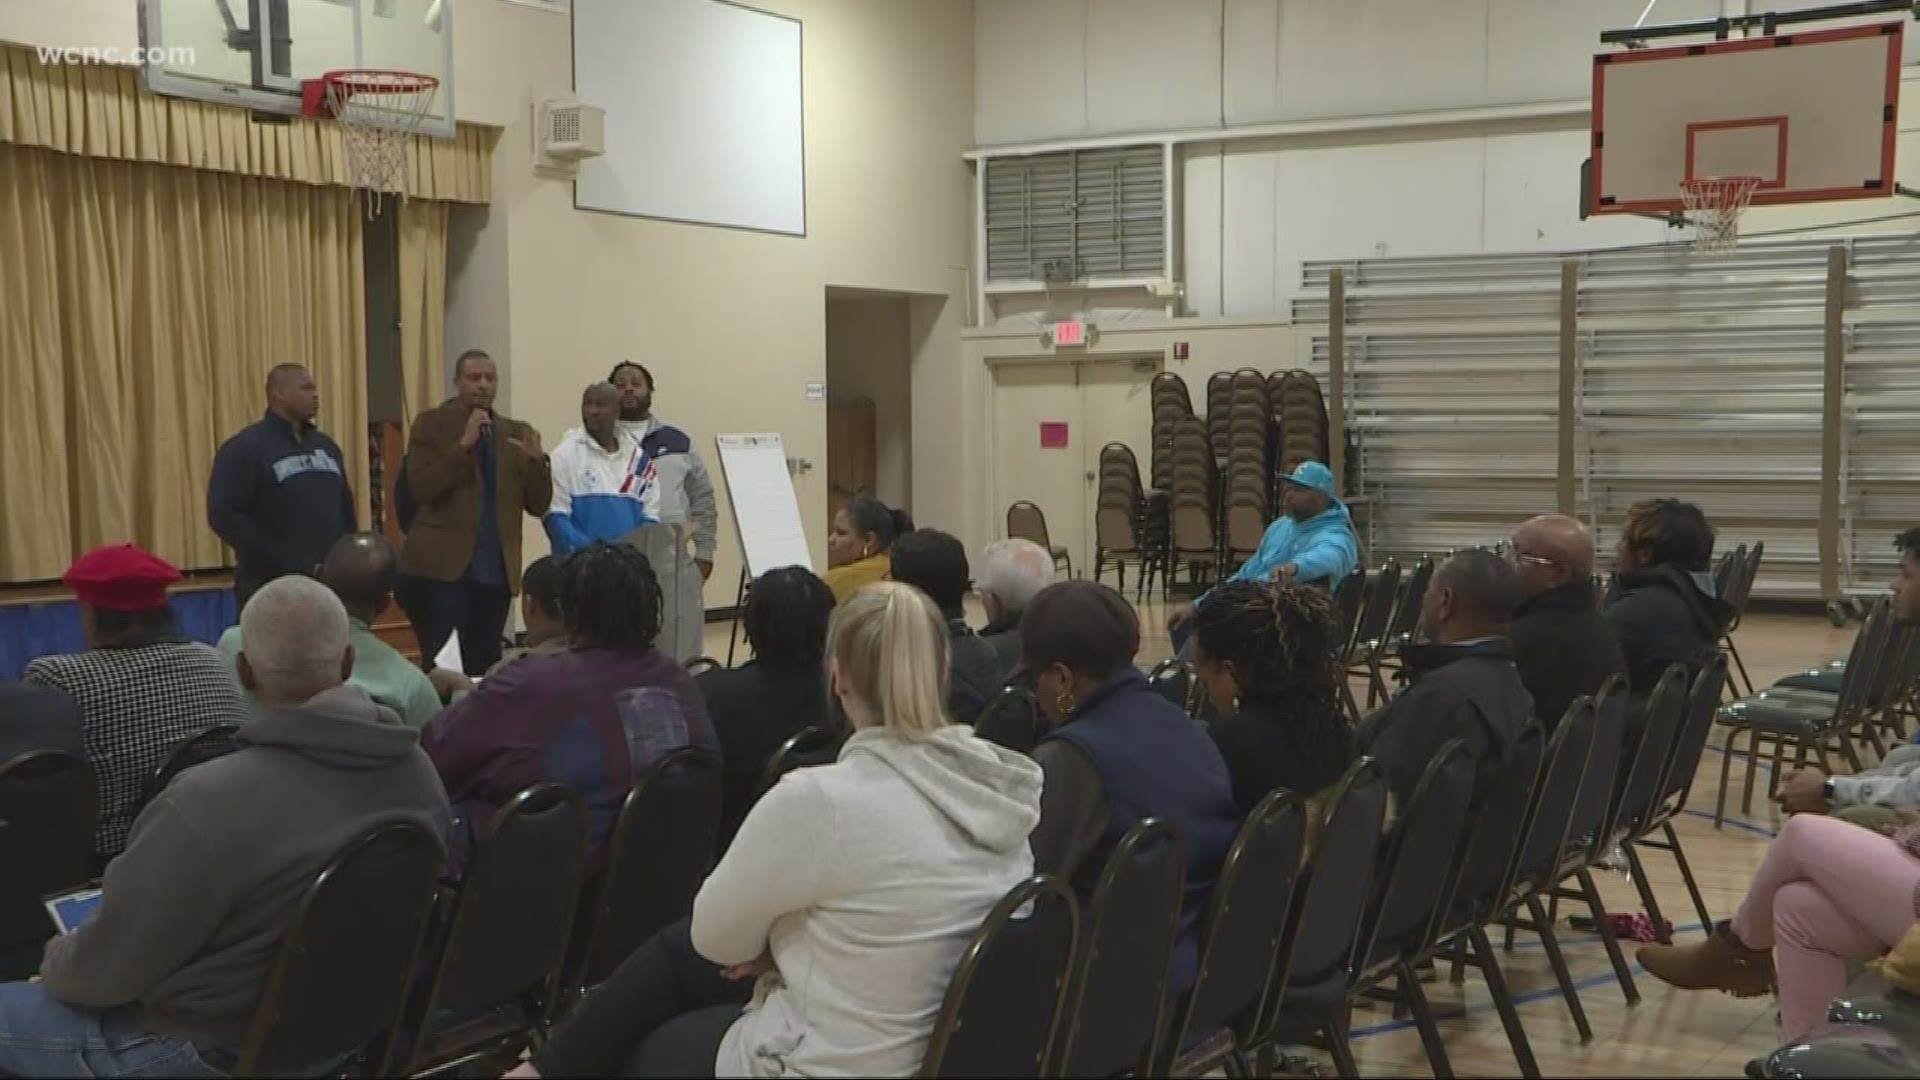 Parents and community groups met after the recent trend of teenagers being accused of and arrested for committing violent crimes.